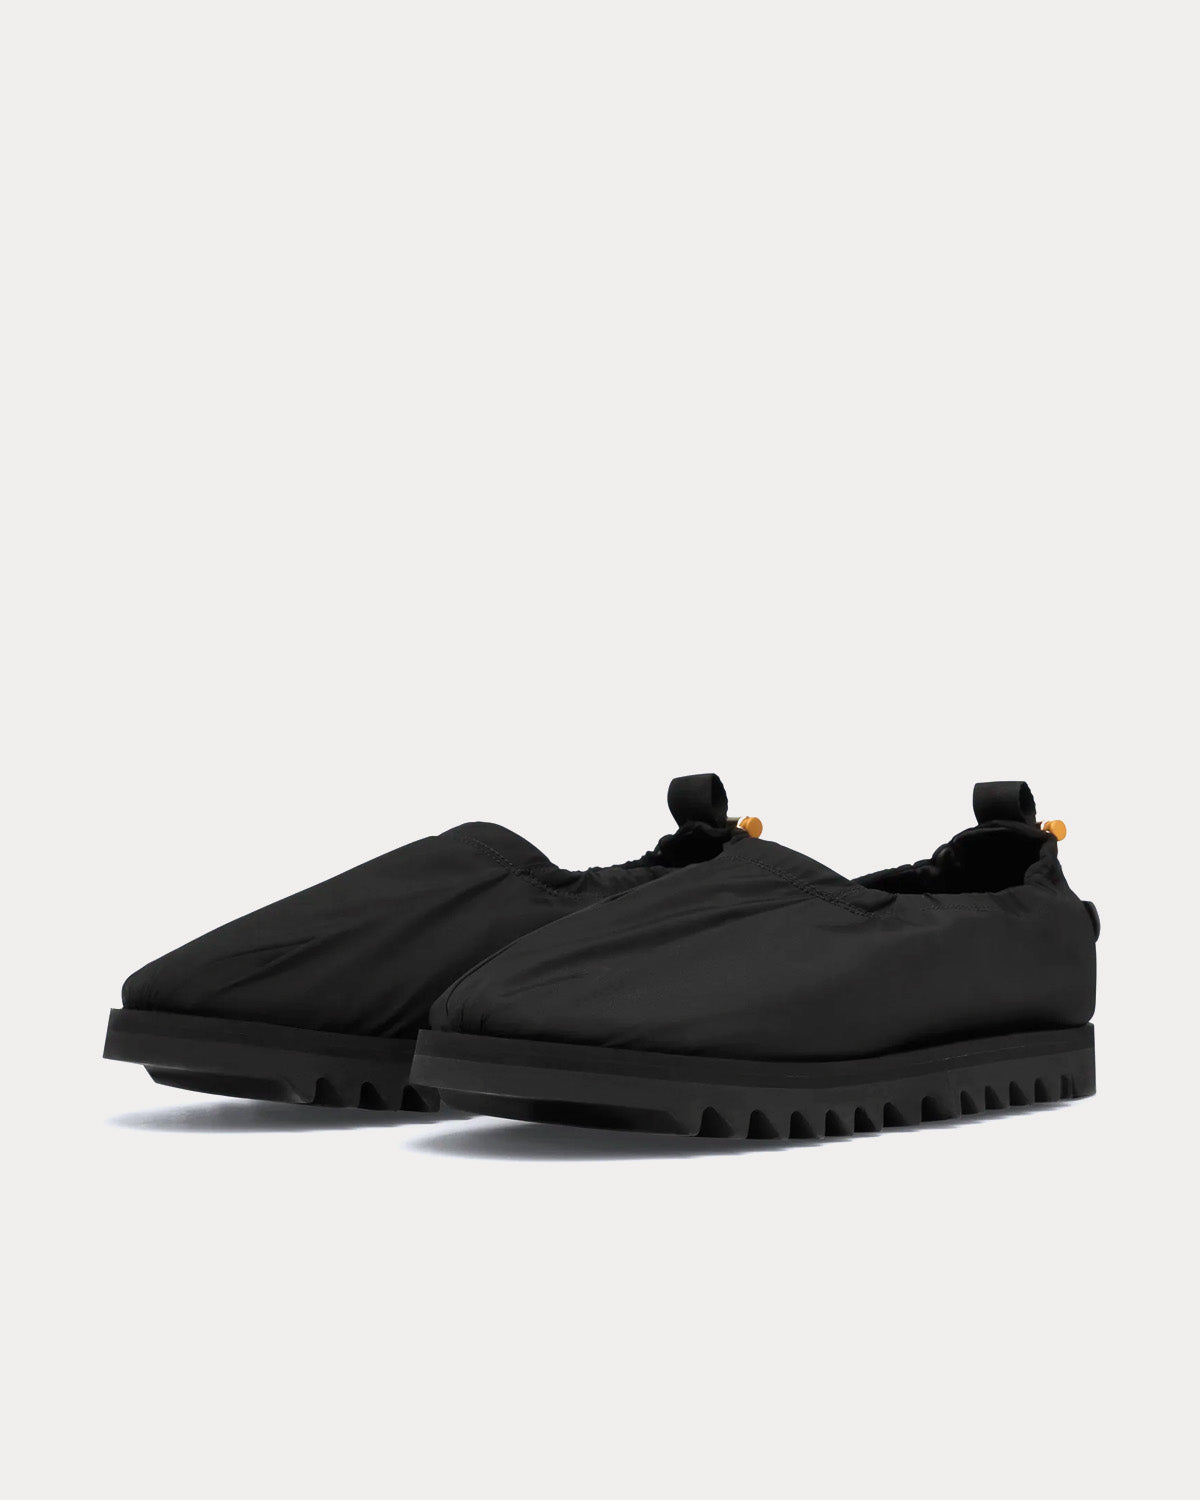 A-COLD-WALL* - Nylon Loafers Black Slip Ons